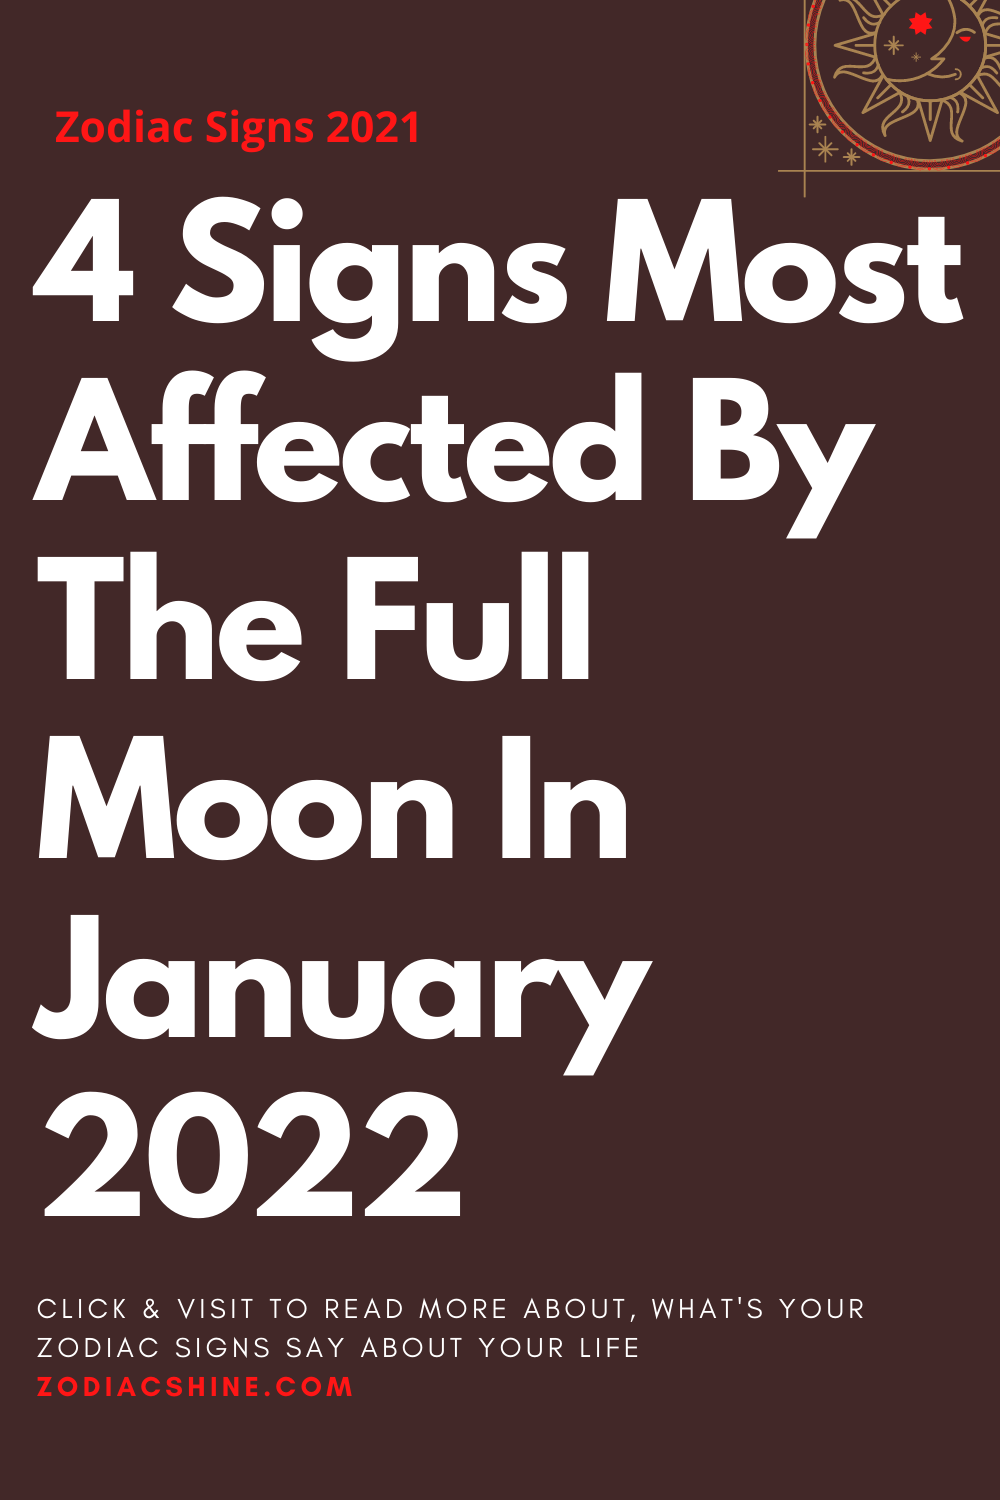 4 Signs Most Affected By The Full Moon In January 2022